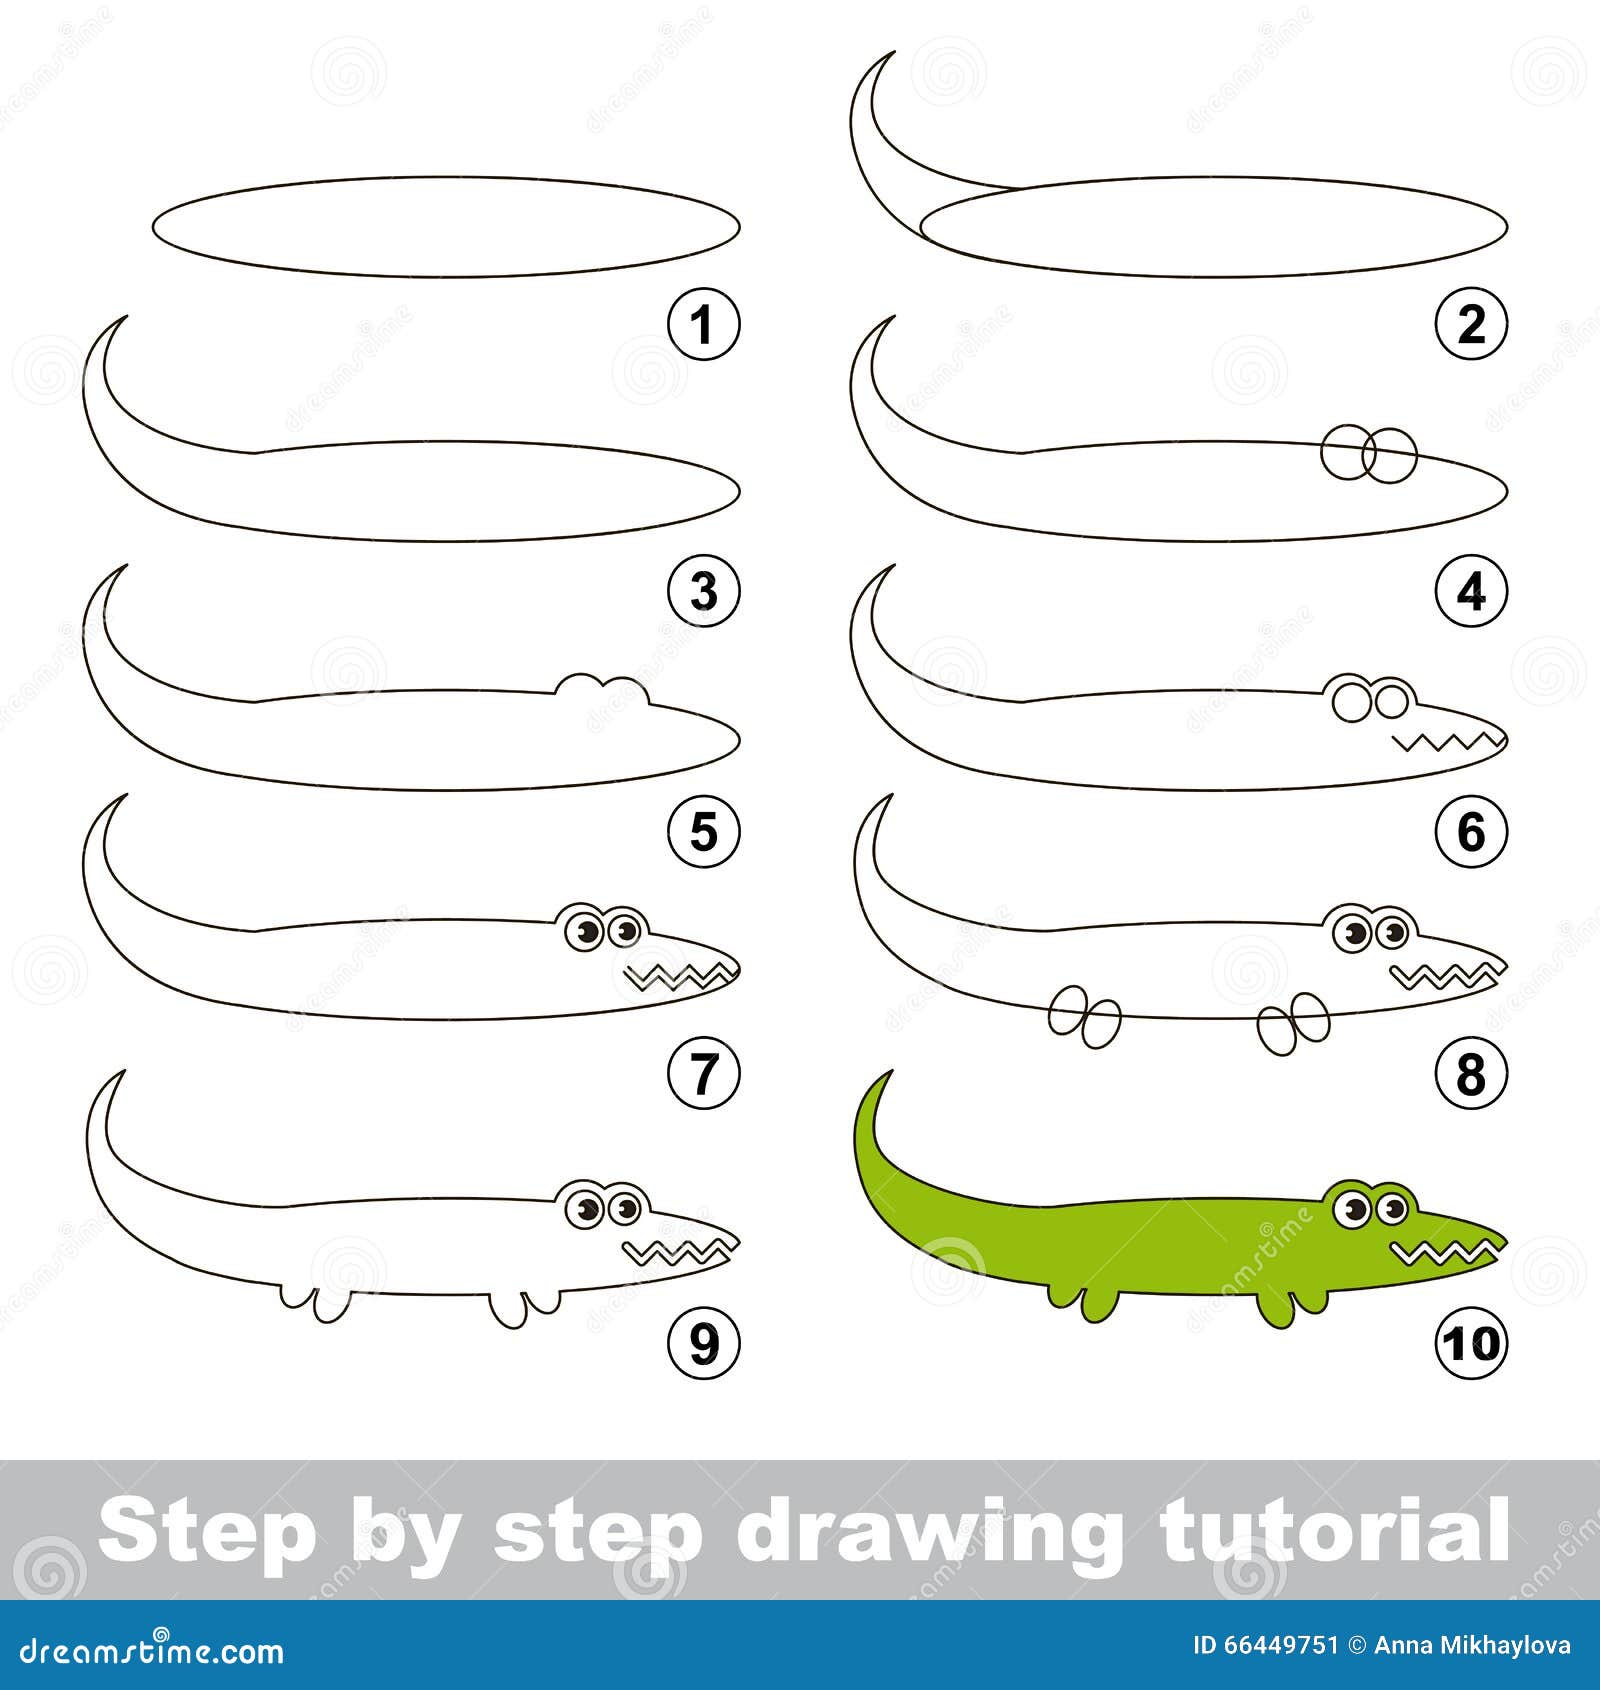 drawing tutorial. how to draw an alligator